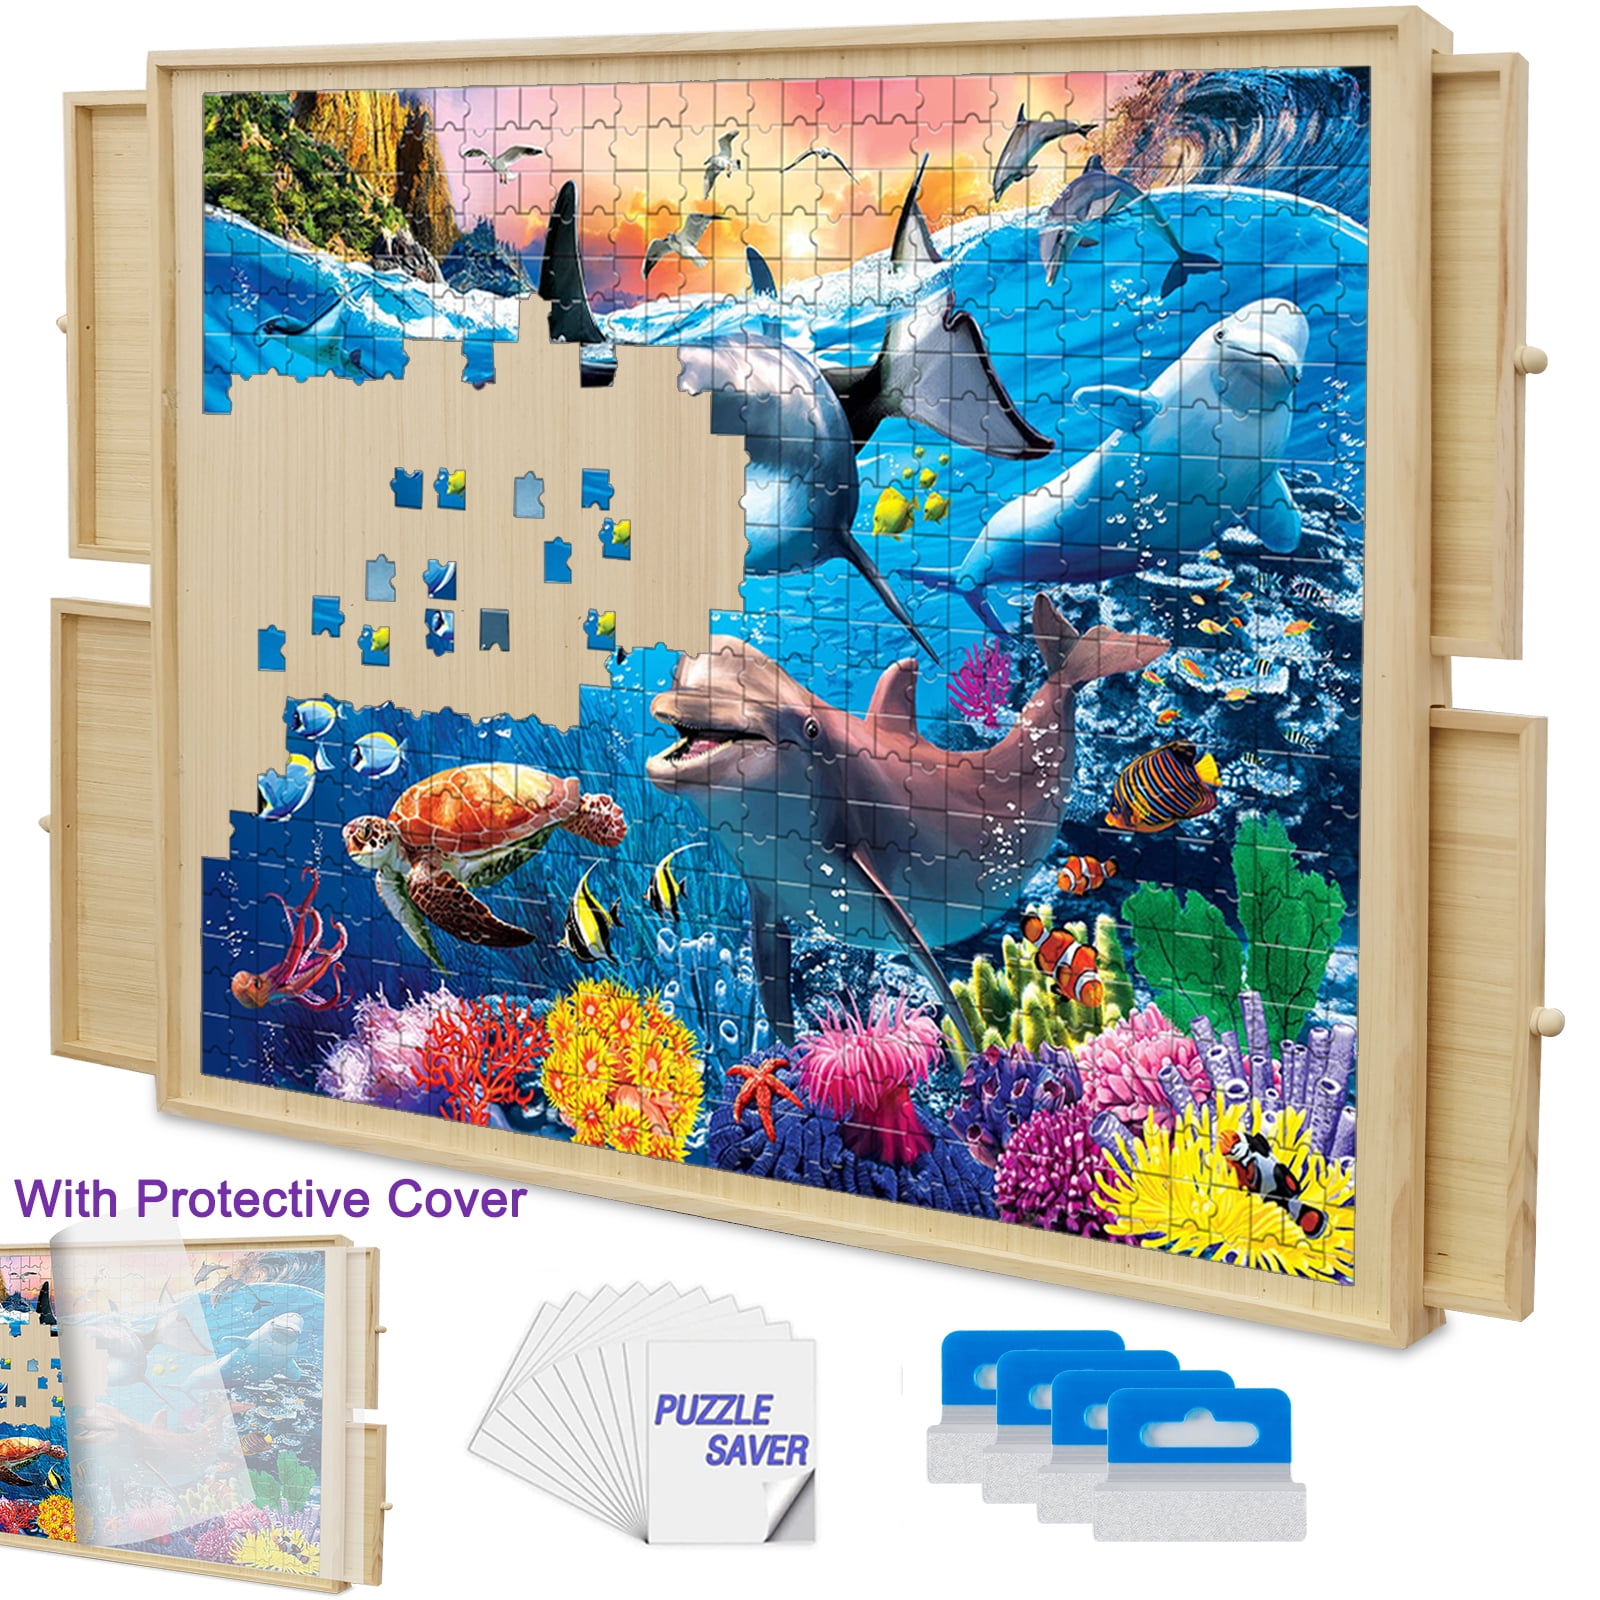 Fishing Versatile Puzzle Comes with a board, 10 wooden fishes